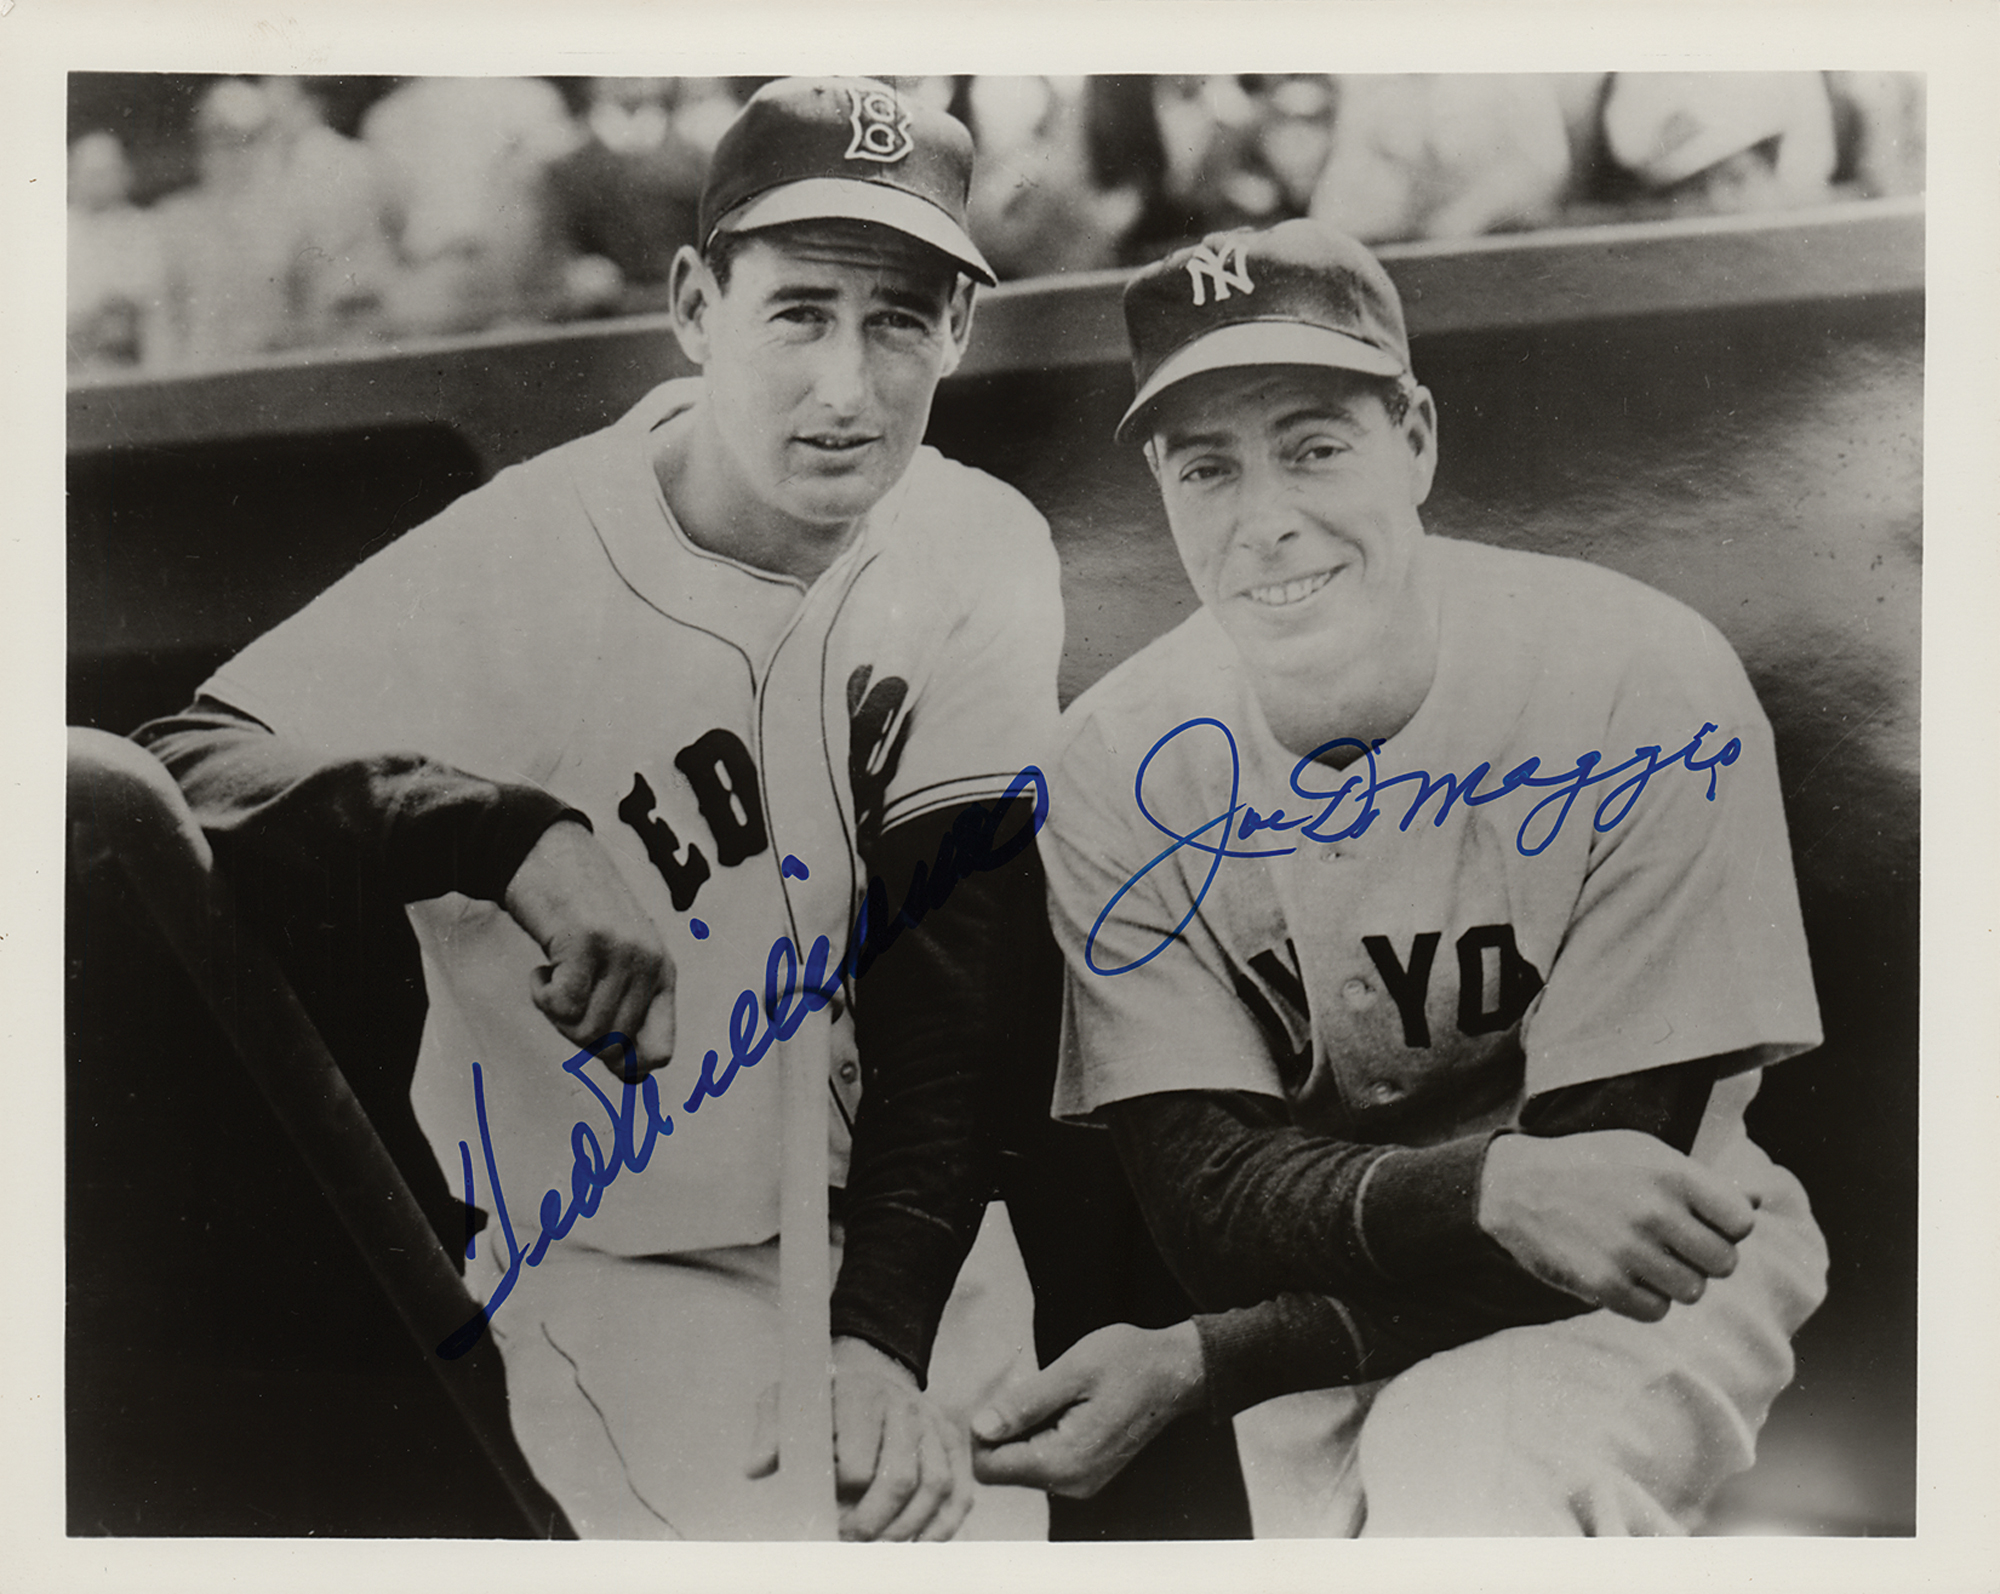 Joe DiMaggio and Ted Williams Signed Photograph